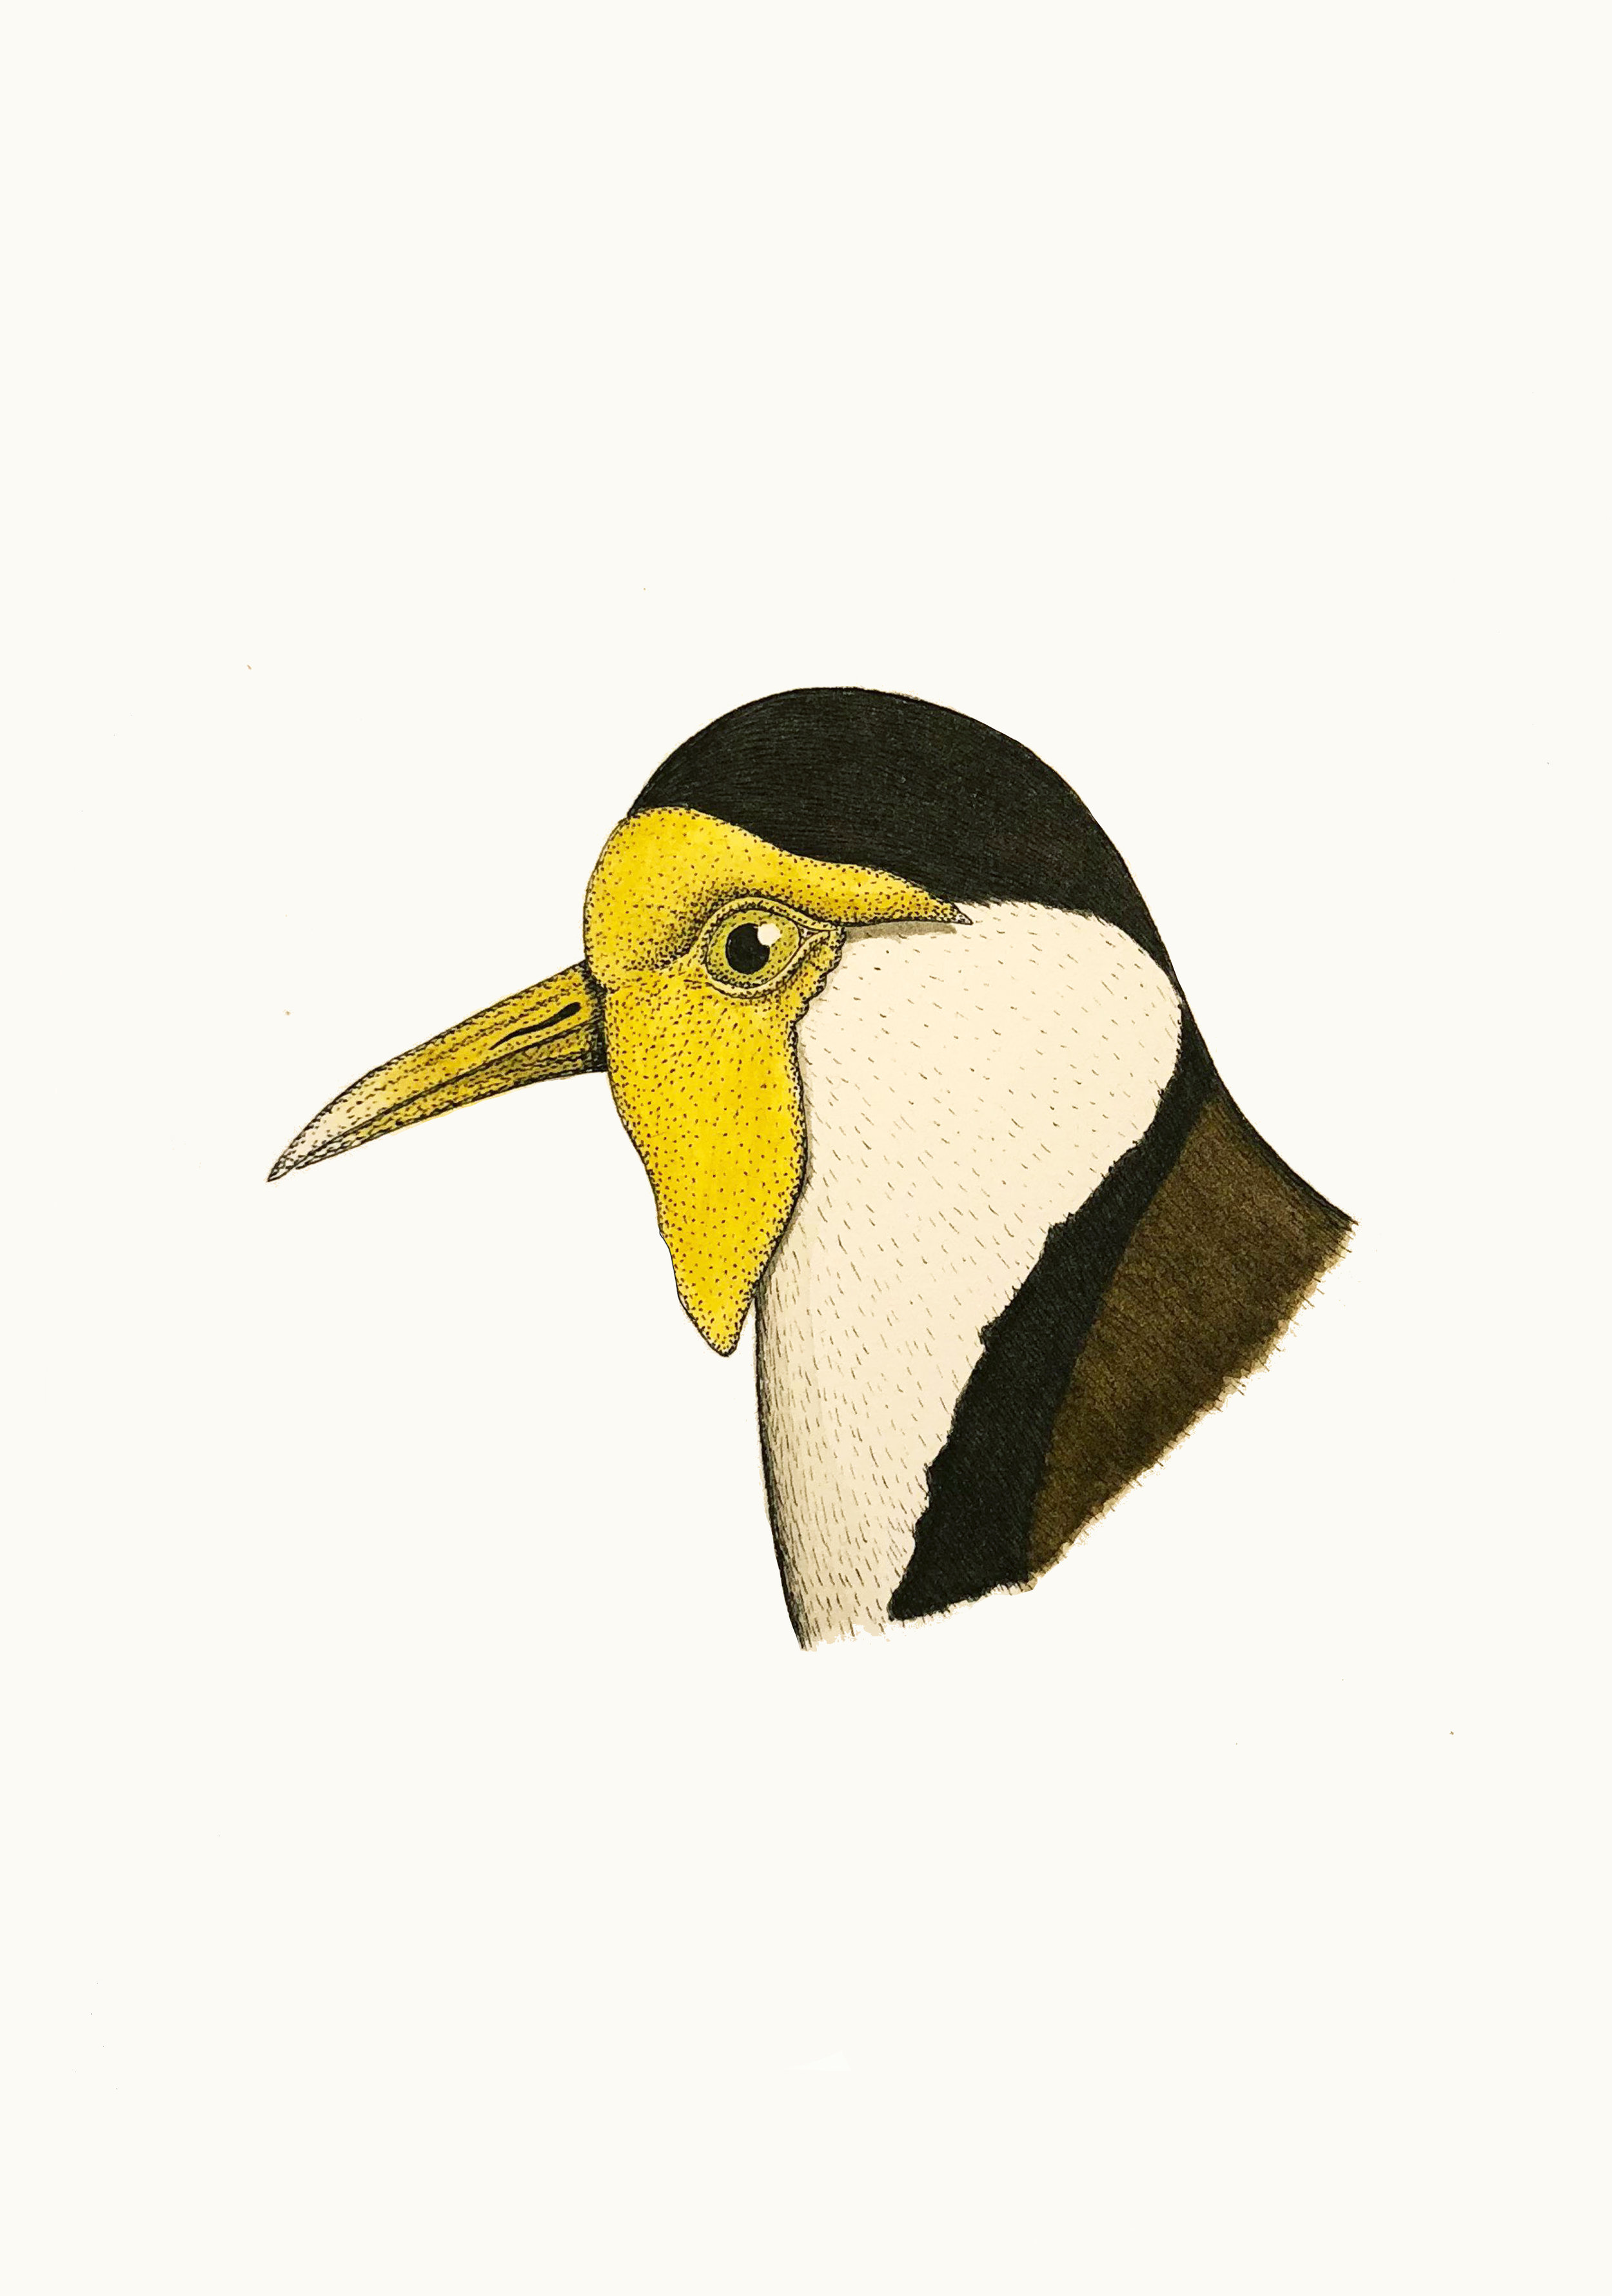 'Portrait of a Masked Lapwing'